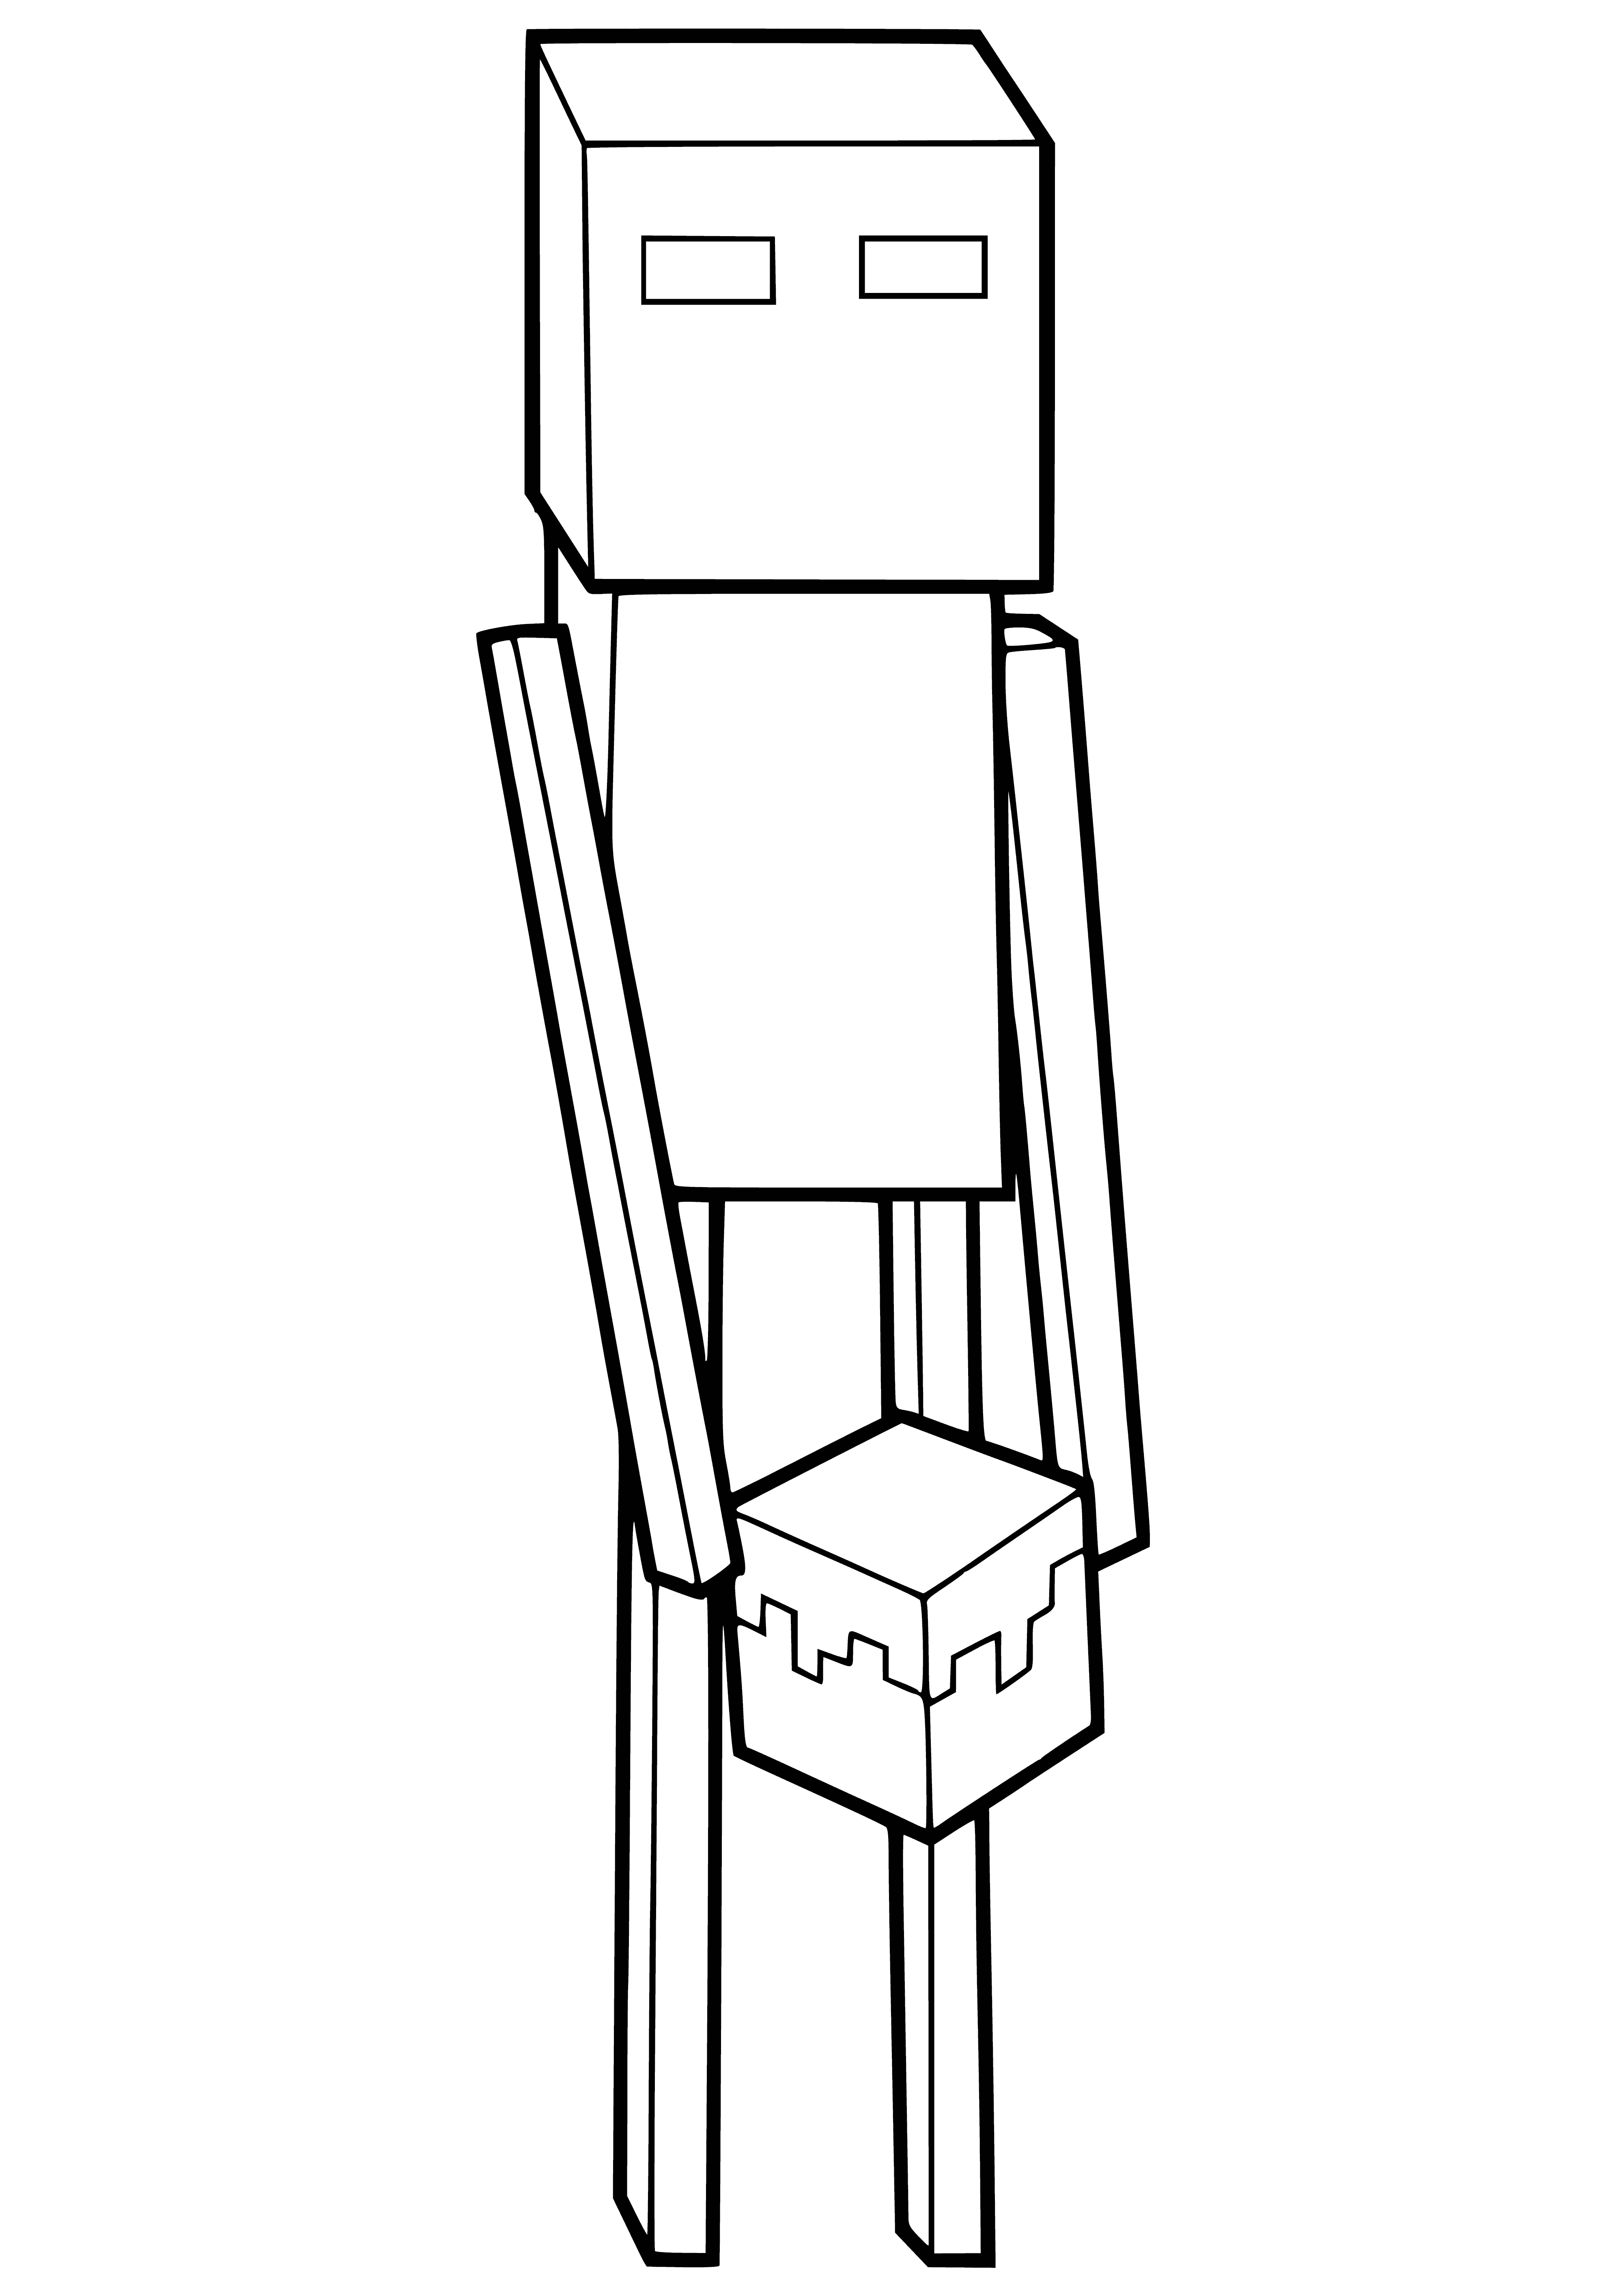 coloring page: An Enderman is a hostile mob in Minecraft, tall, dark and thin with long black legs and arms, rectangular head and purple eyes. When attacked, it teleports.